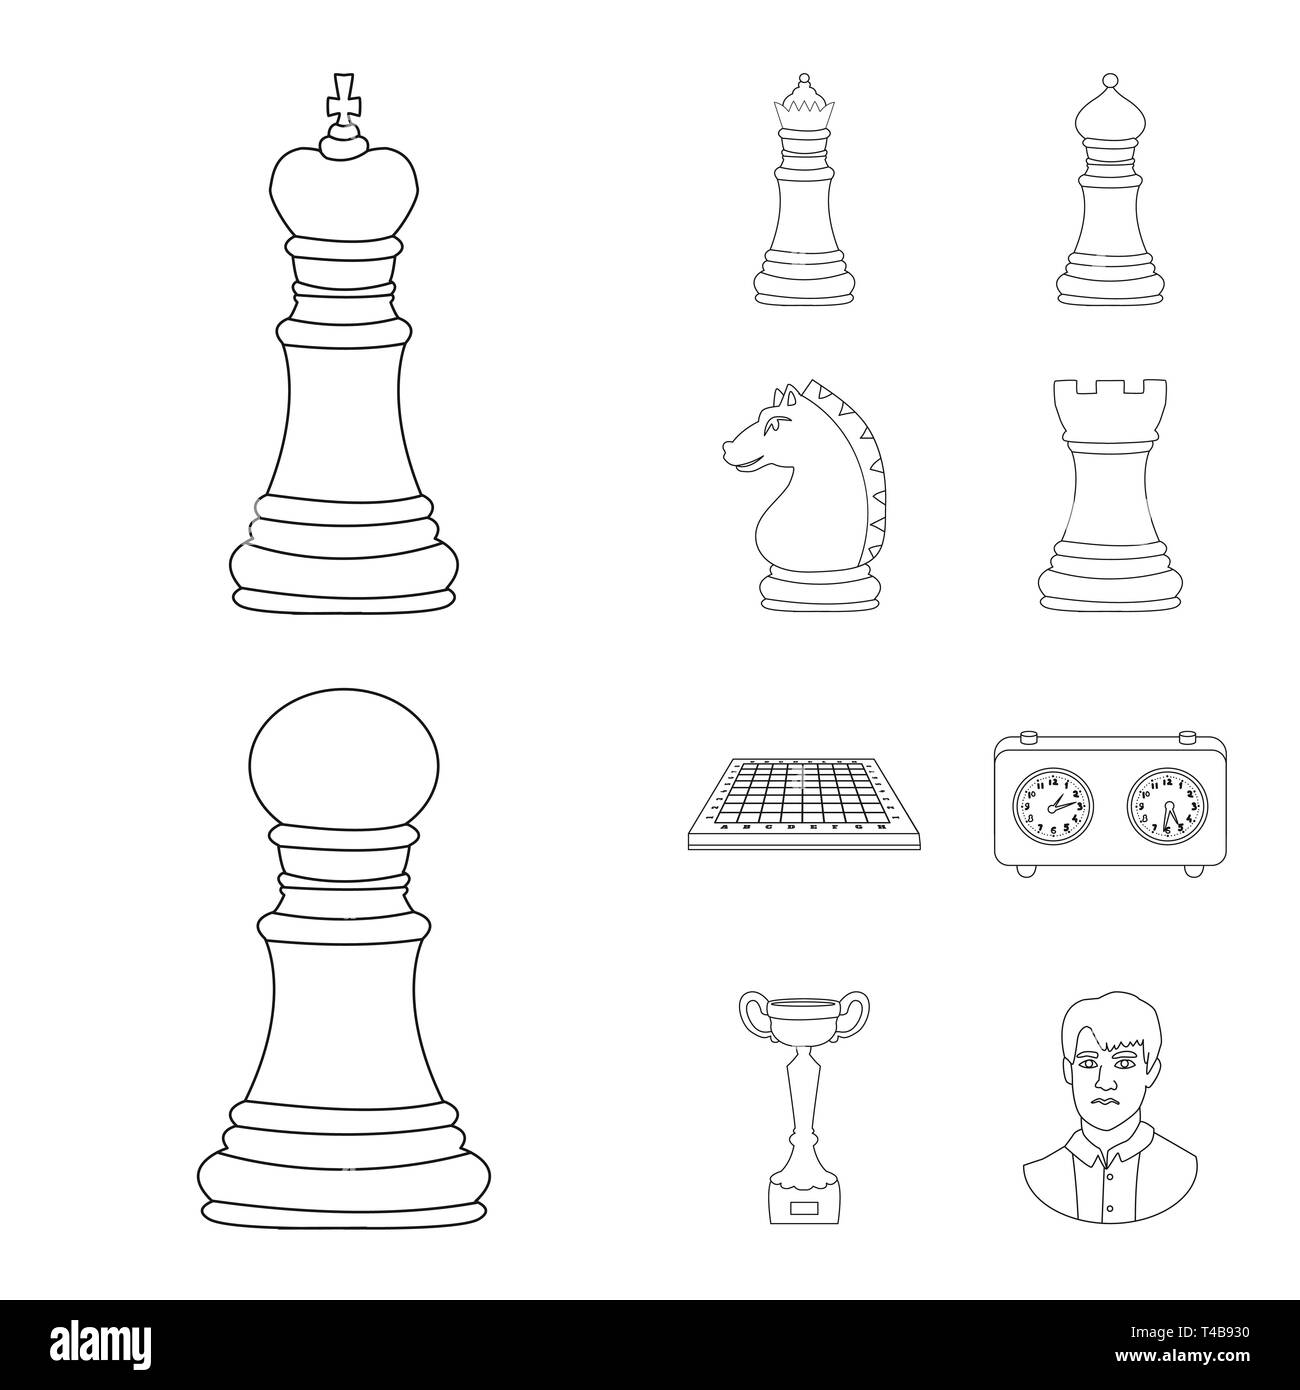 king,queen,bishop,knight,rook,pawn,chessboard,clock,cup,man,board,strategic,horse,black,timer,winner,face,leadership,check,head,network,counter,table,button,goblet,guy,leader,business,piece,strategy,tactical,play,checkmate,thin,club,target,chess,game,set,vector,icon,illustration,isolated,collection,design,element,graphic,sign,outline,line Vector Vectors , Stock Vector